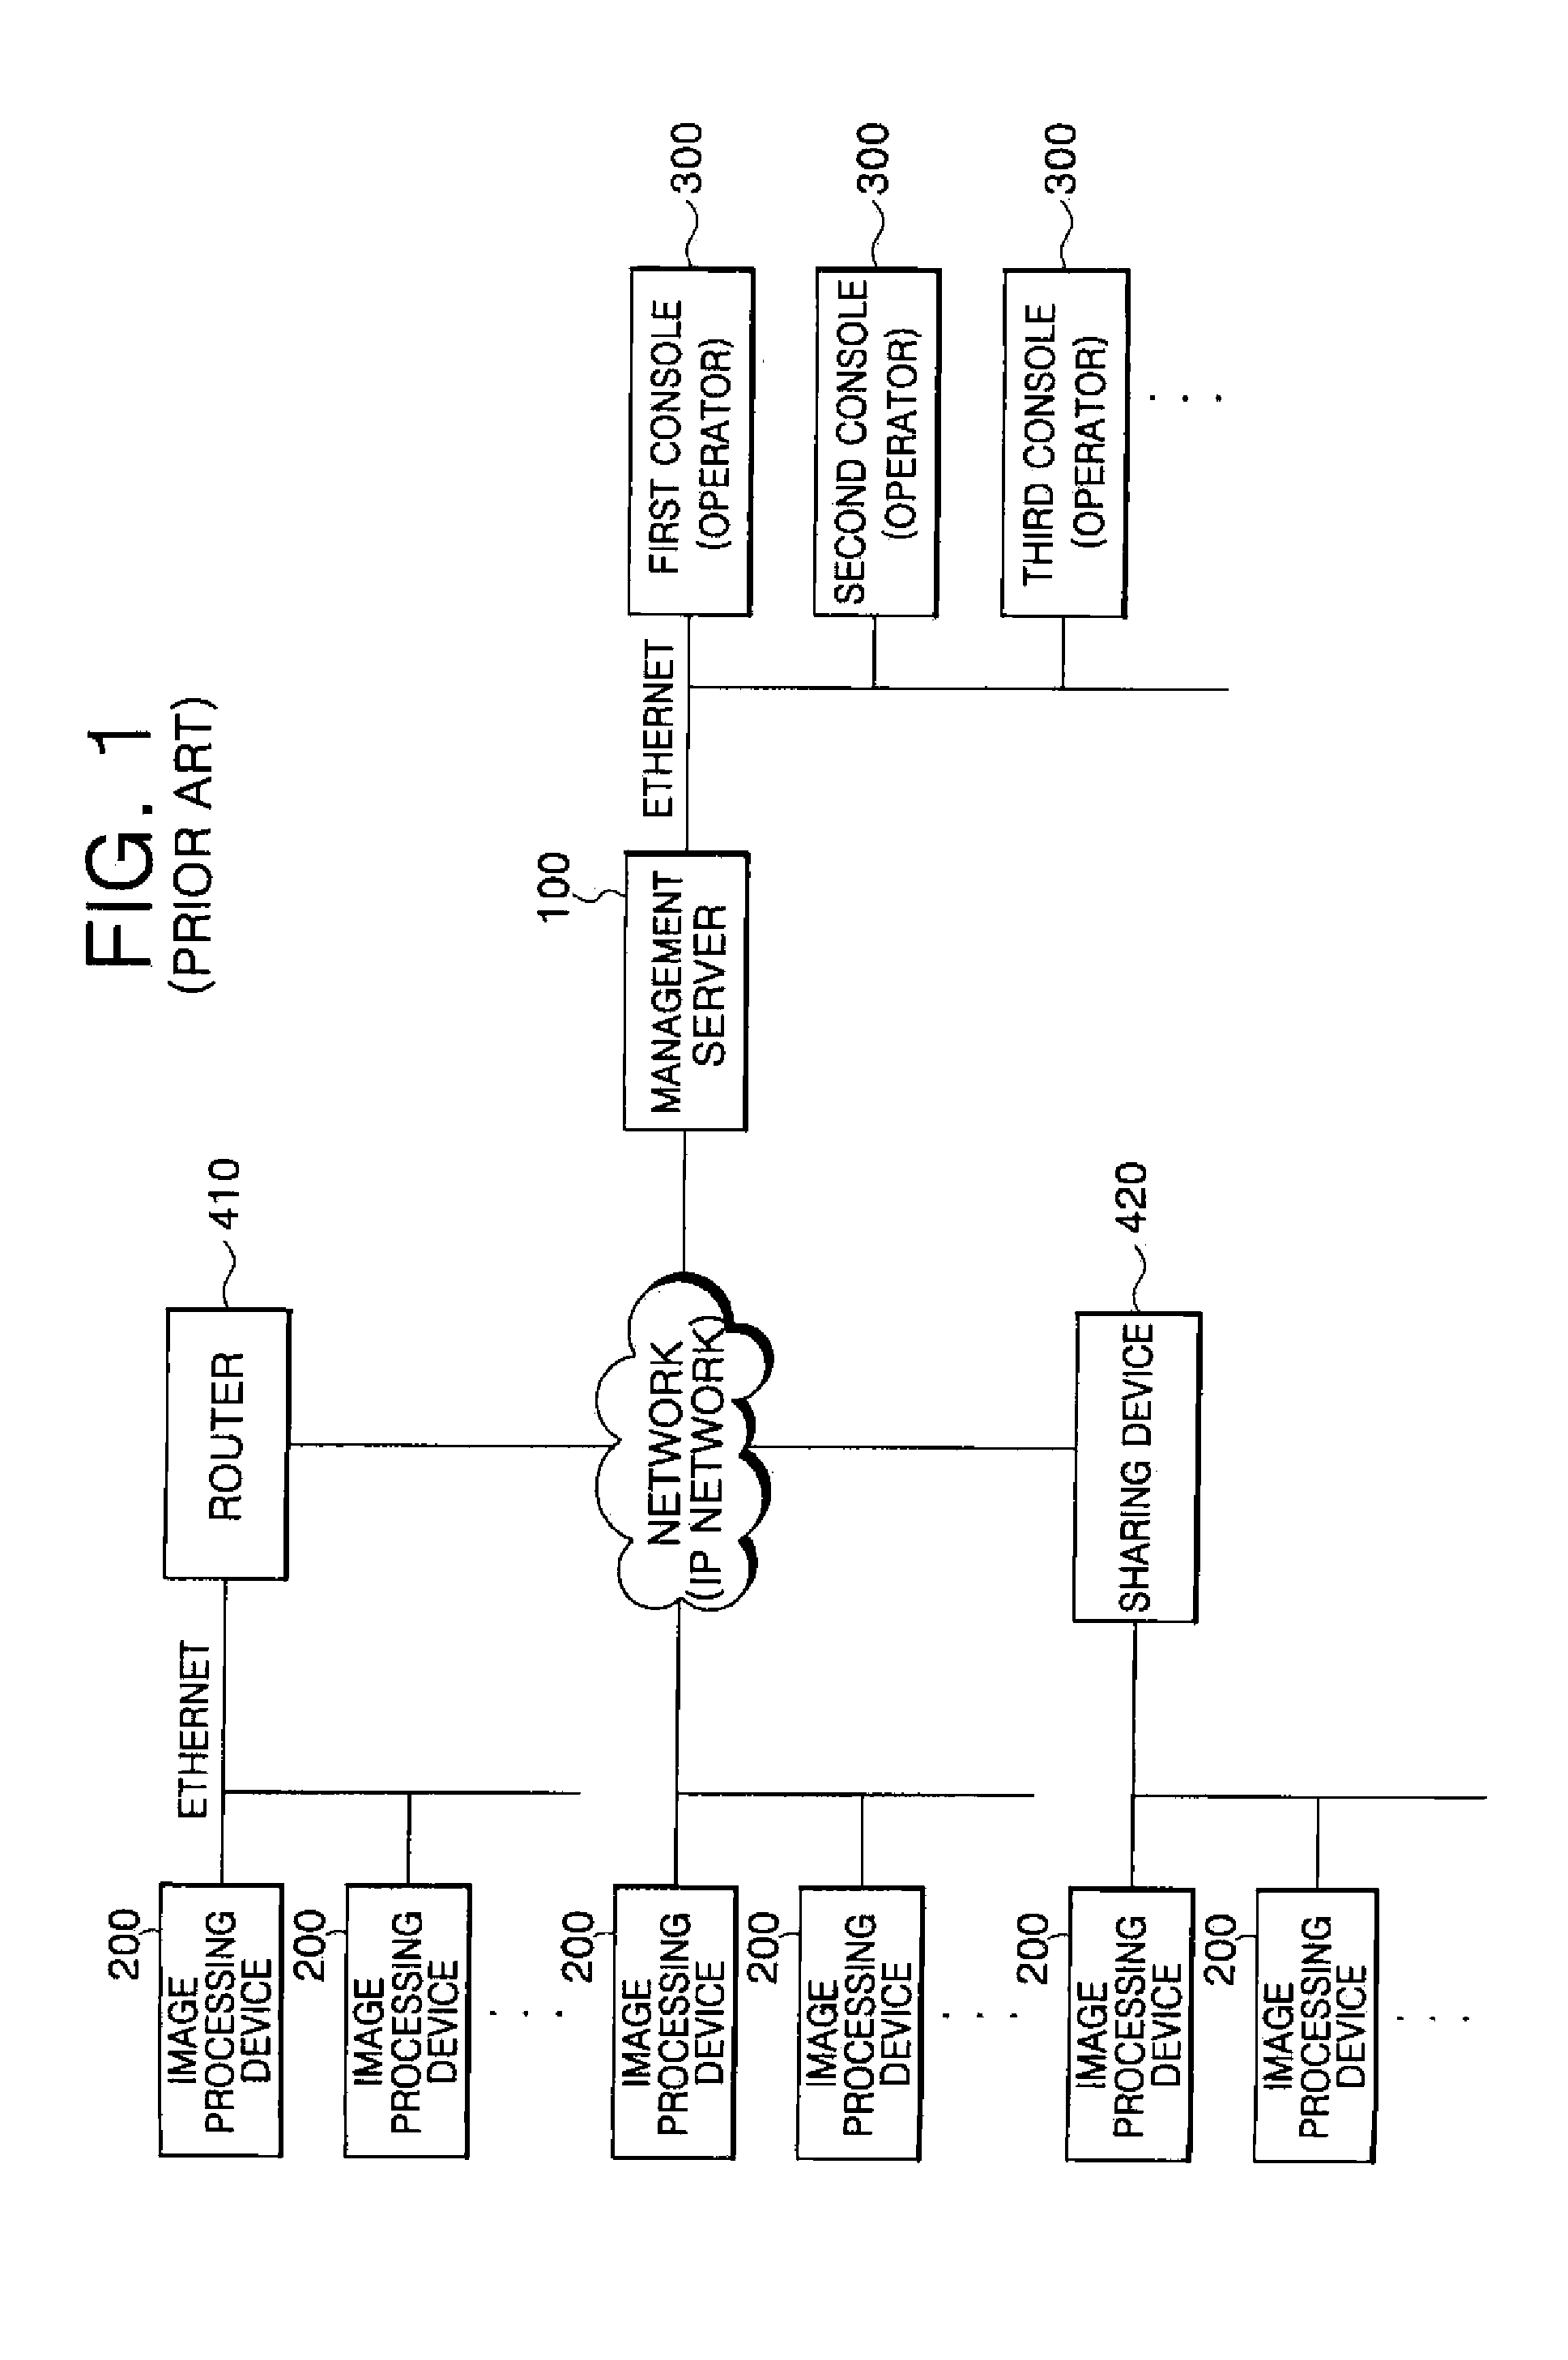 System and method for remote management of image processing device